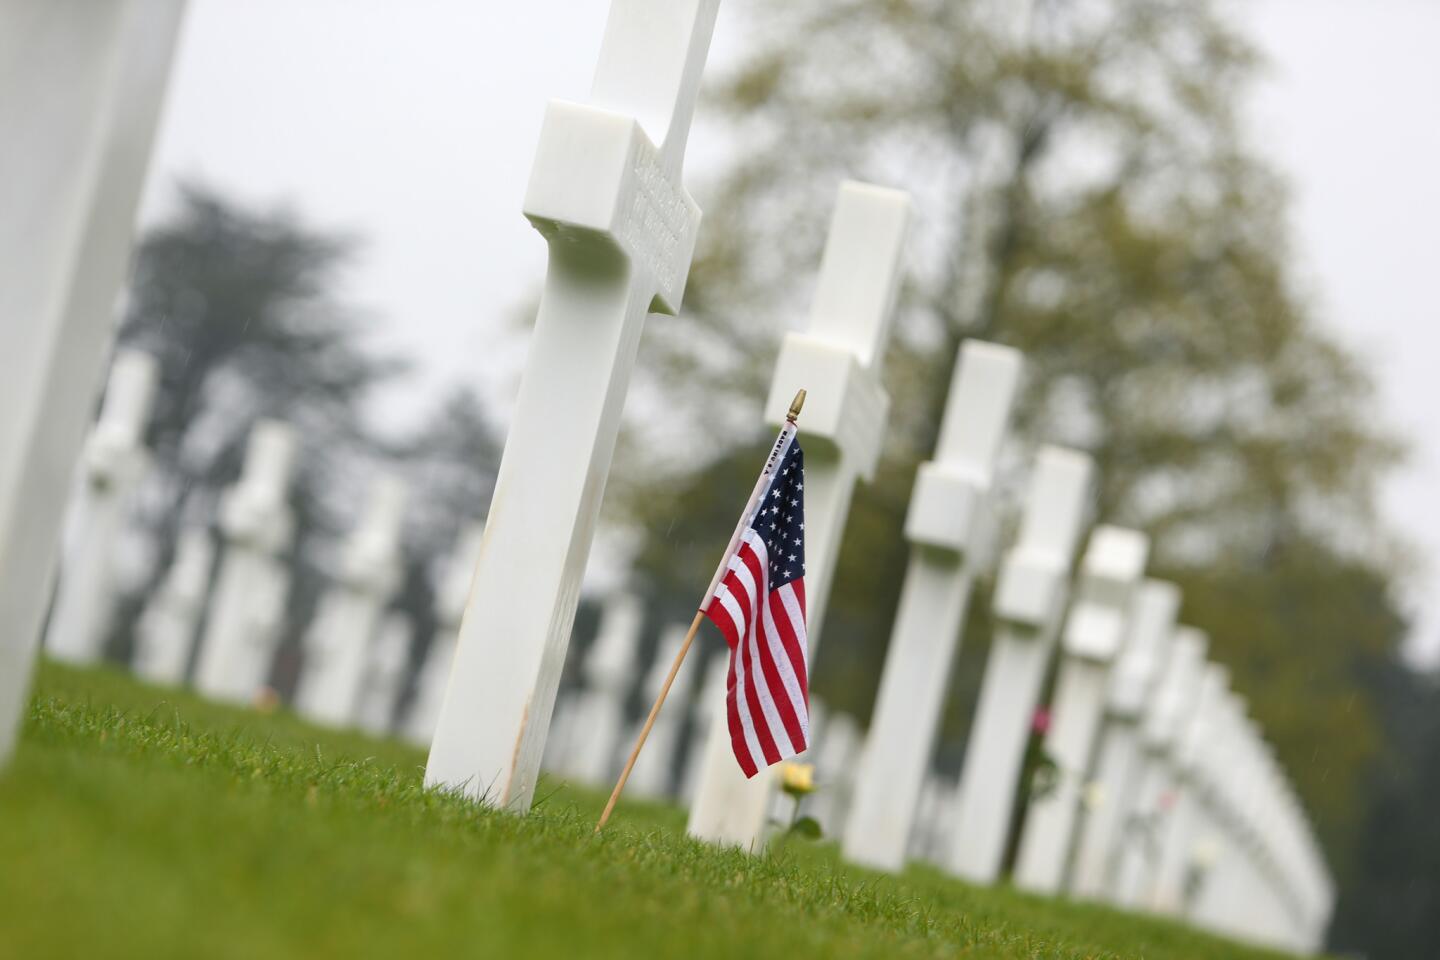 The U.S. cemetery in Colleville-sur-Mer, Normandy